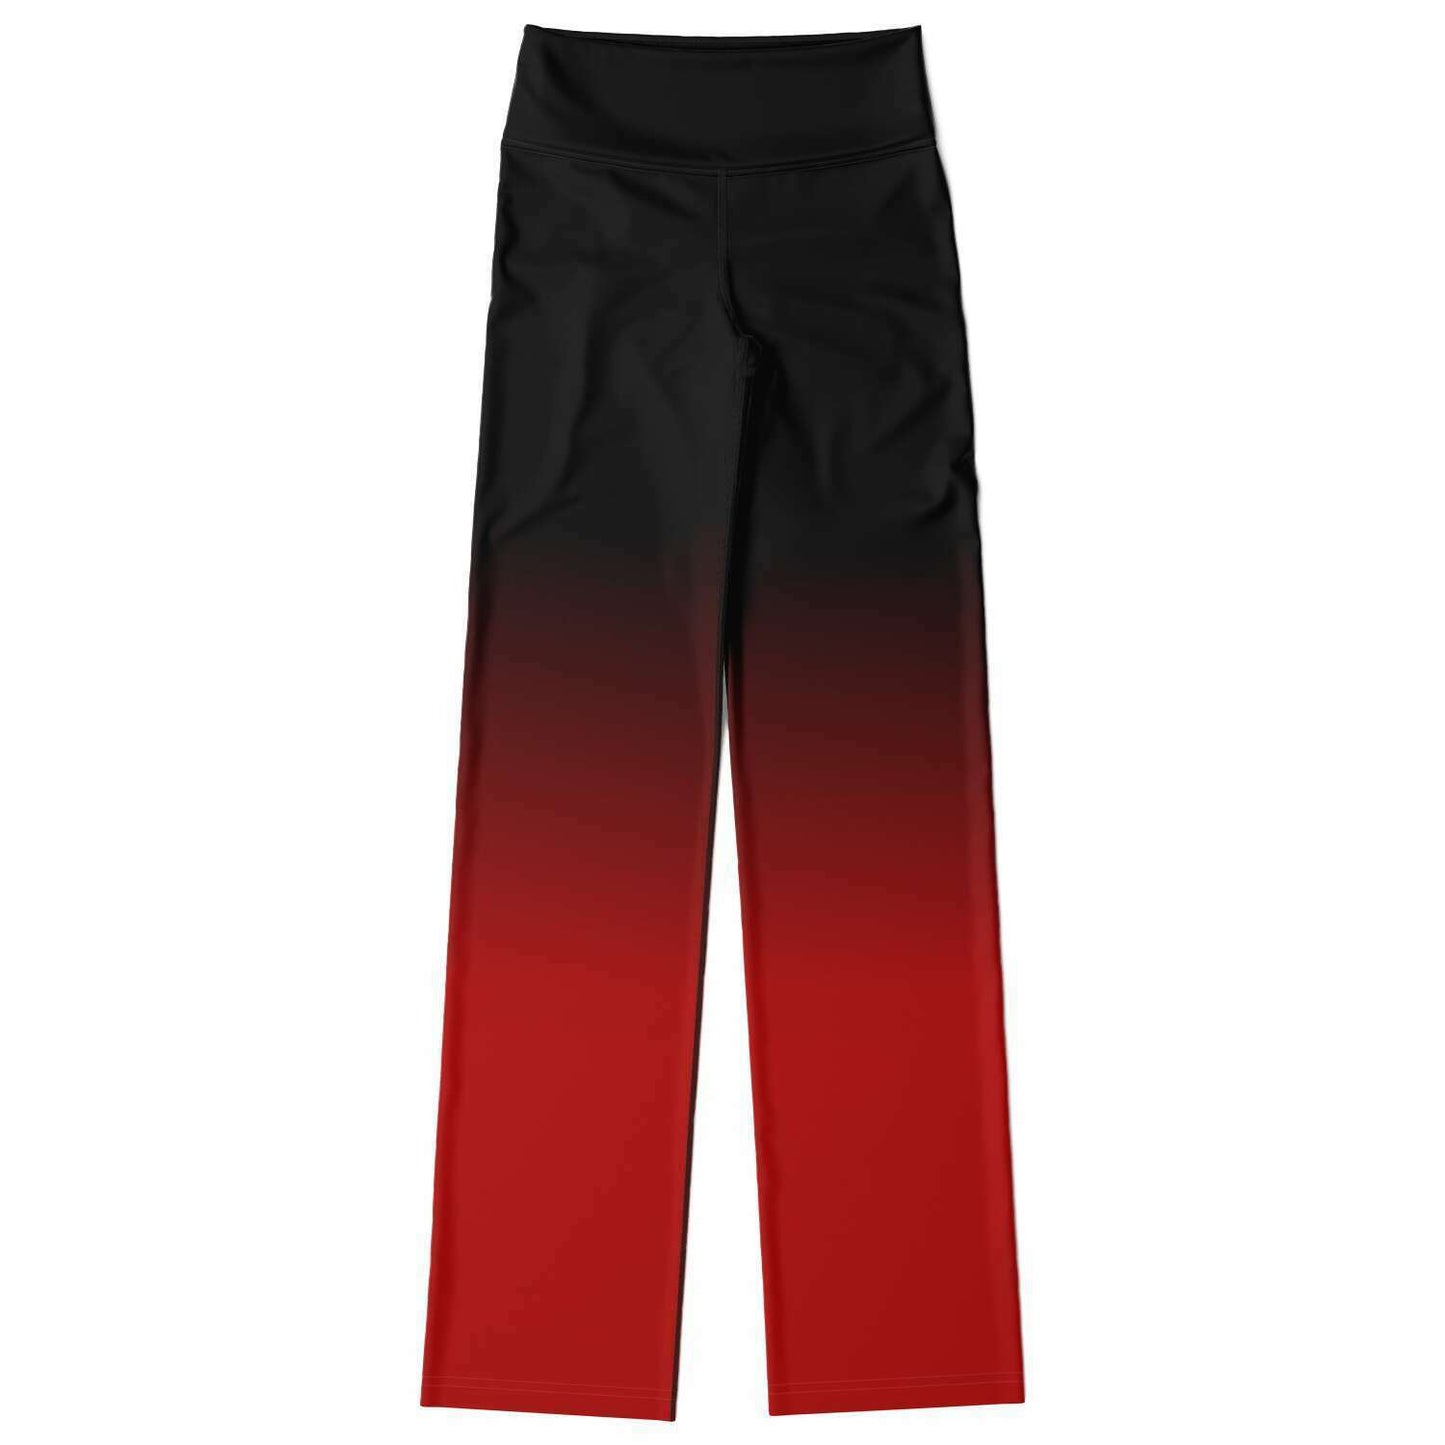 Black Red Ombre Flared Leggings, Tie Dye Printed High Waisted Yoga Designer with Pockets Stretch Workout Sexy Flare Pants Starcove Fashion